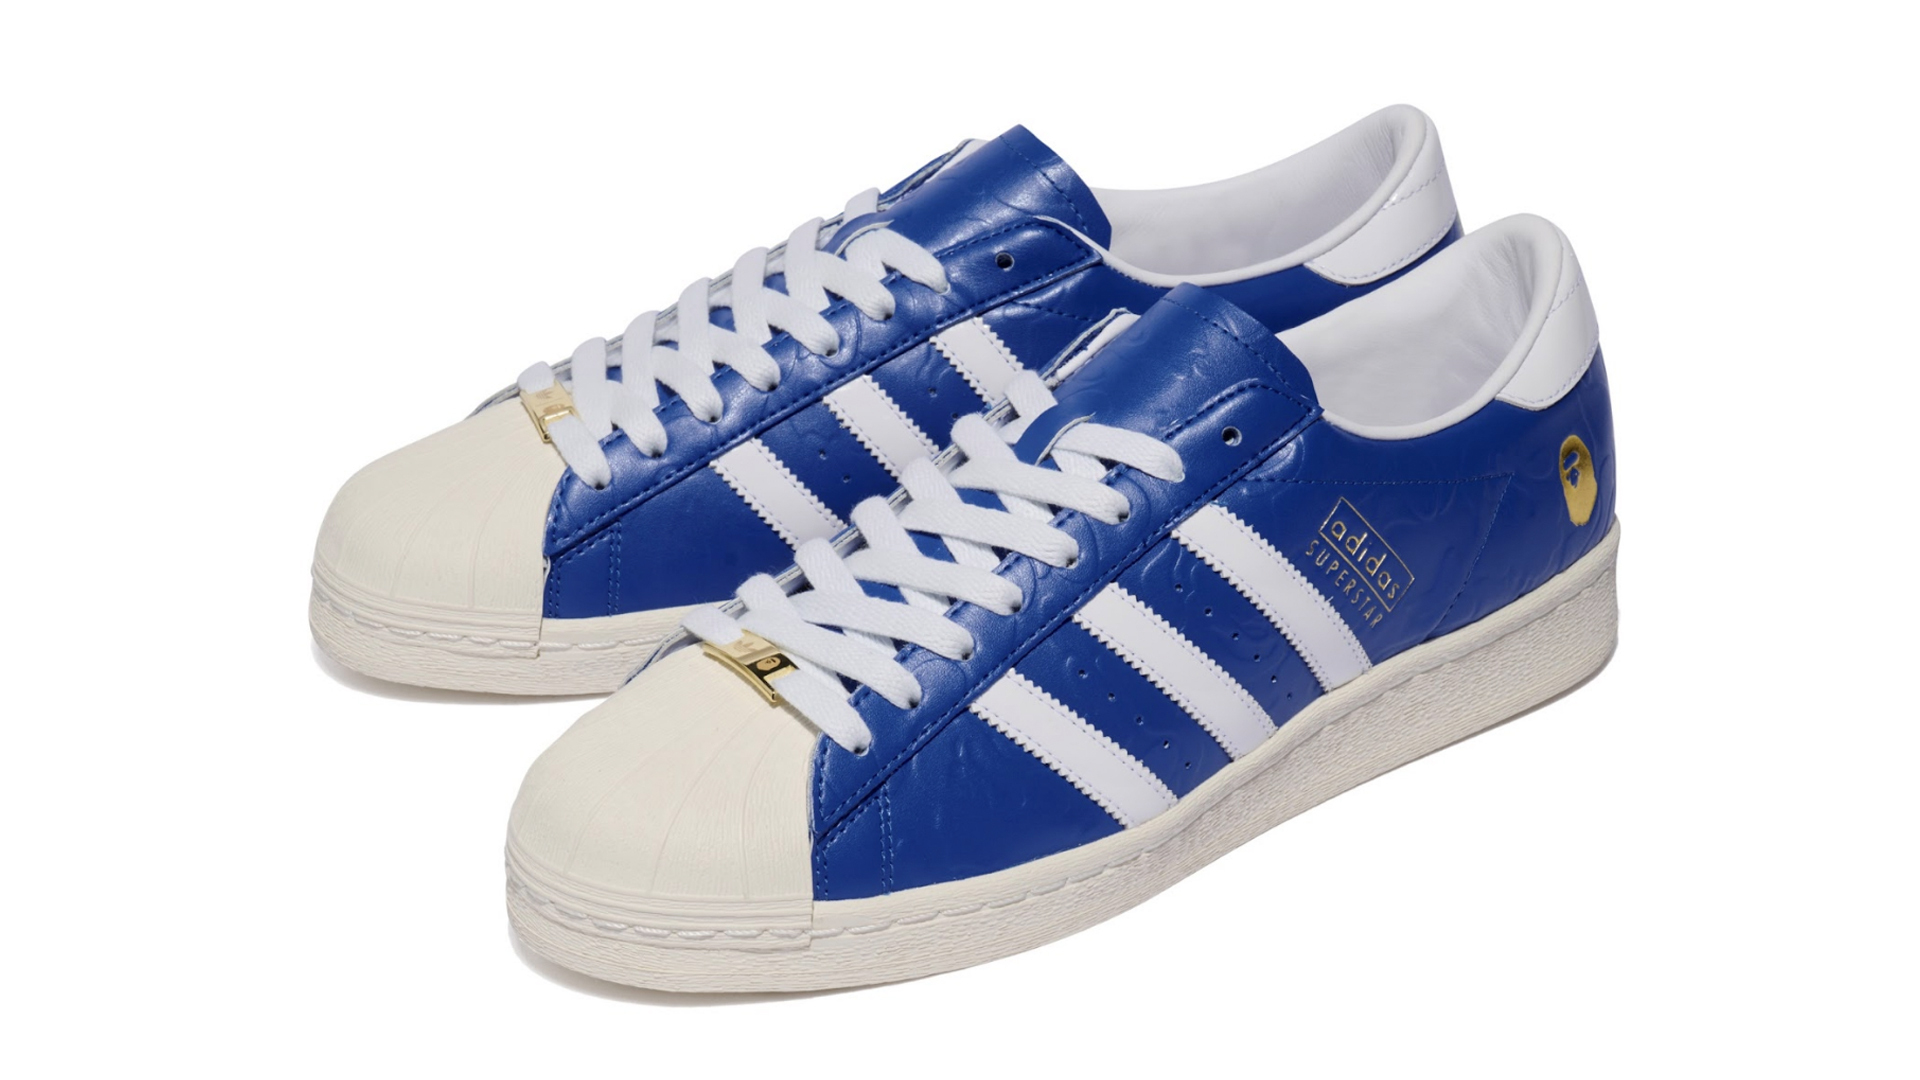 Blue and white Adidas Superstar sneakers with gold accents on the laces and logo